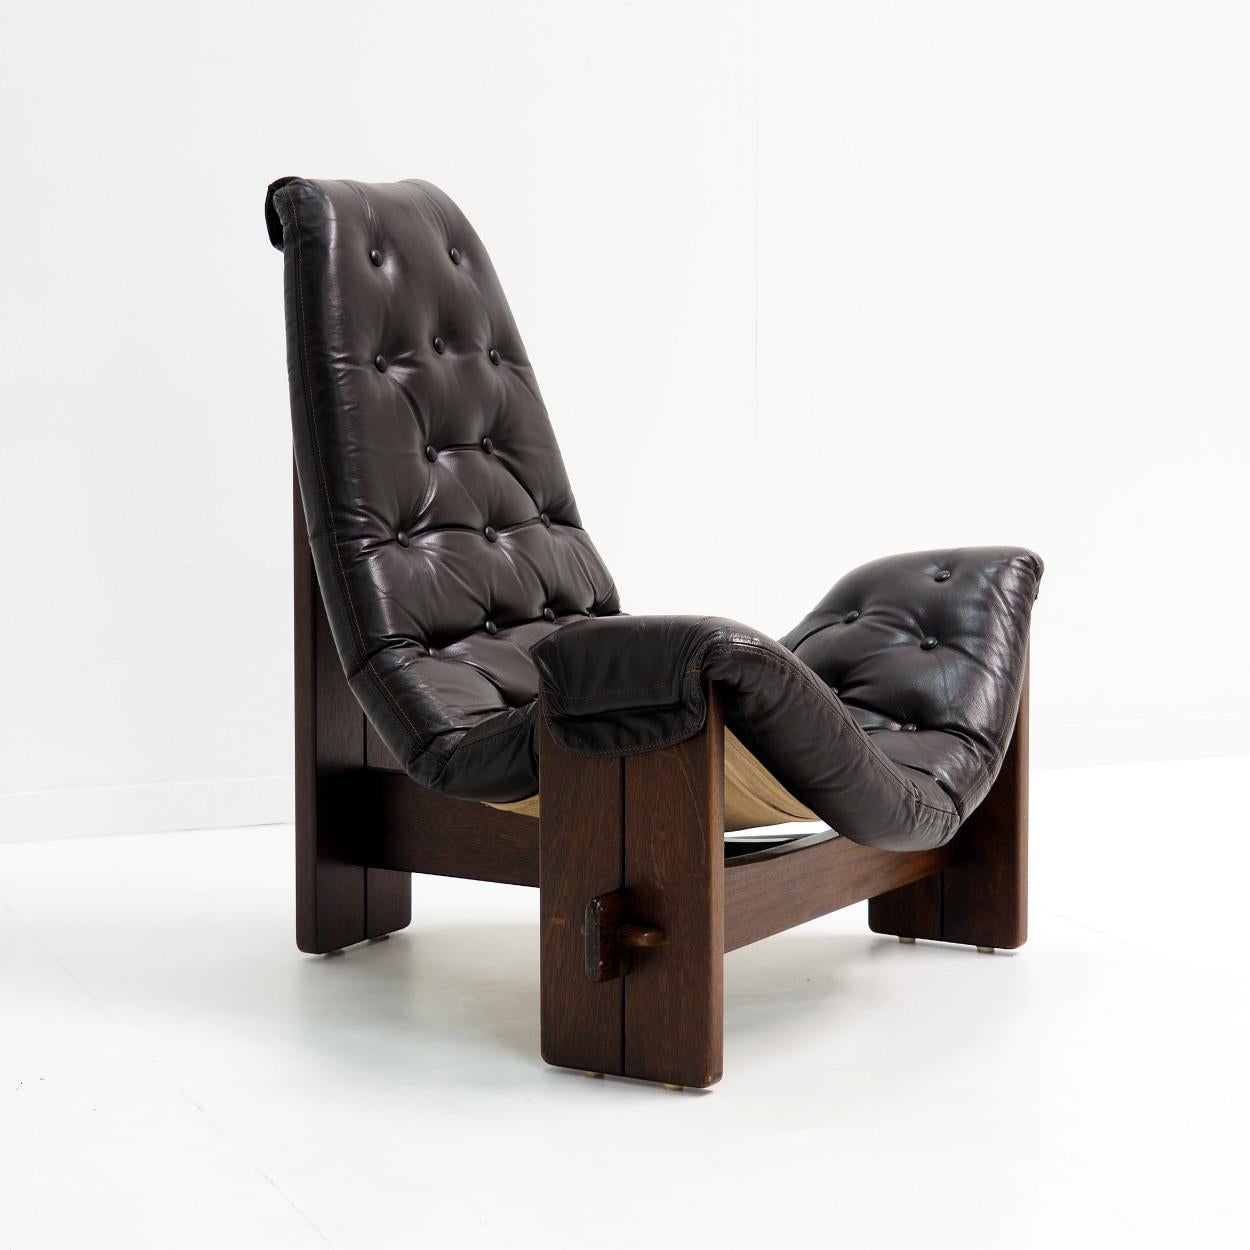 Very special lounge- or sling chair of most probably Brazilian origin.

This chair, with its brutalist and beautiful jungle look, is handmade using only natural materials and earthy colours. No screws used. The canvas and dark brown leather is